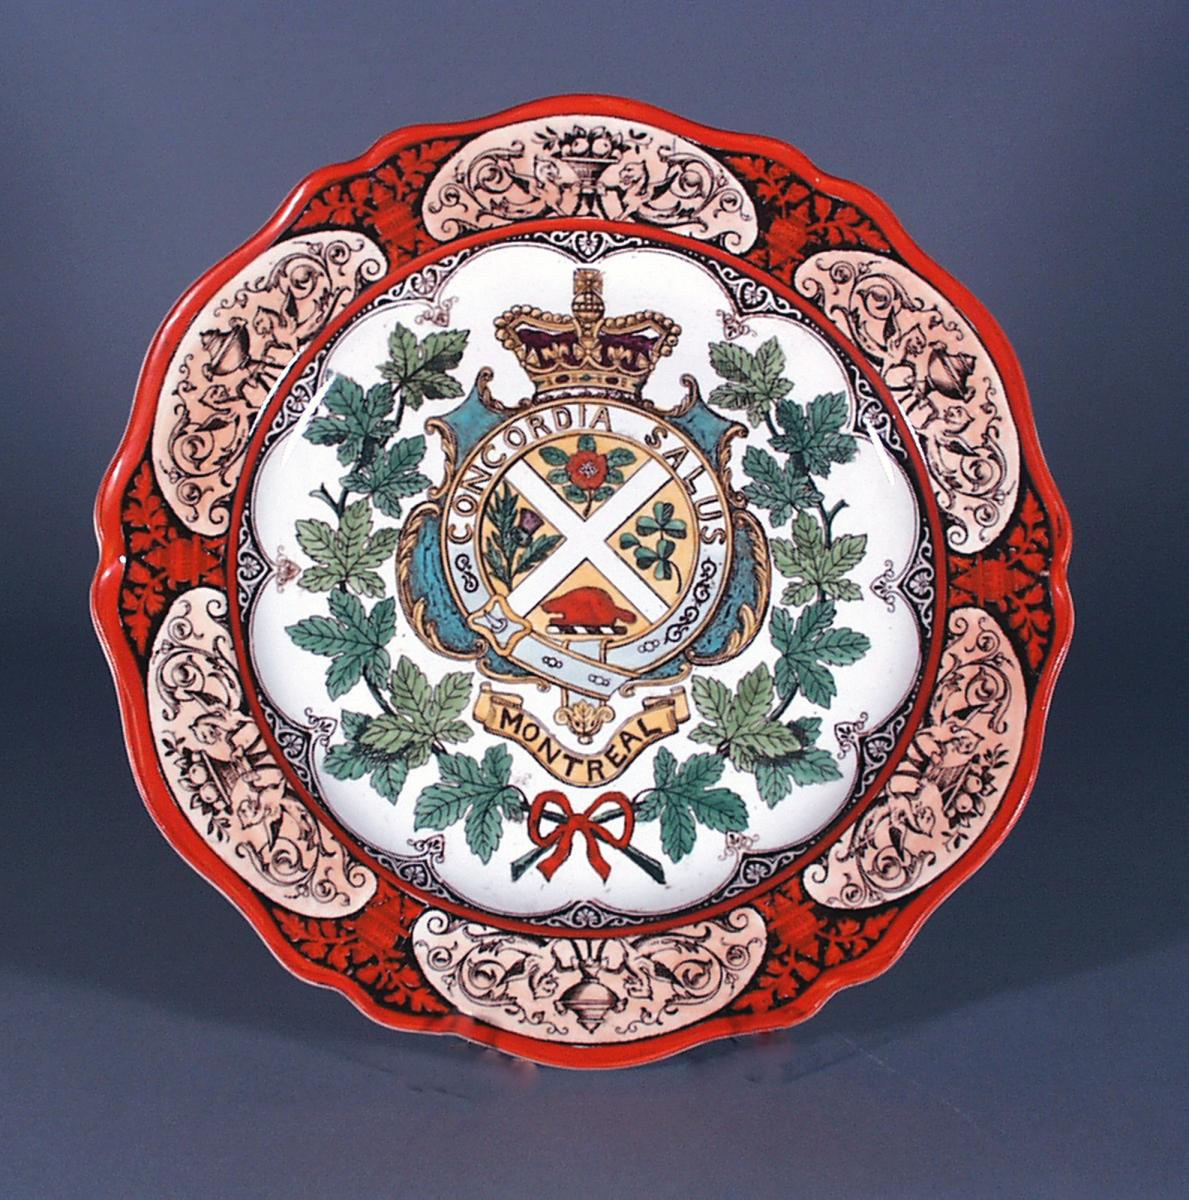 Wedgwood Canadian Series Pottery Plate with Coat of Arms of Montreal.  Wedgwood Pottery.  Dated 1913.